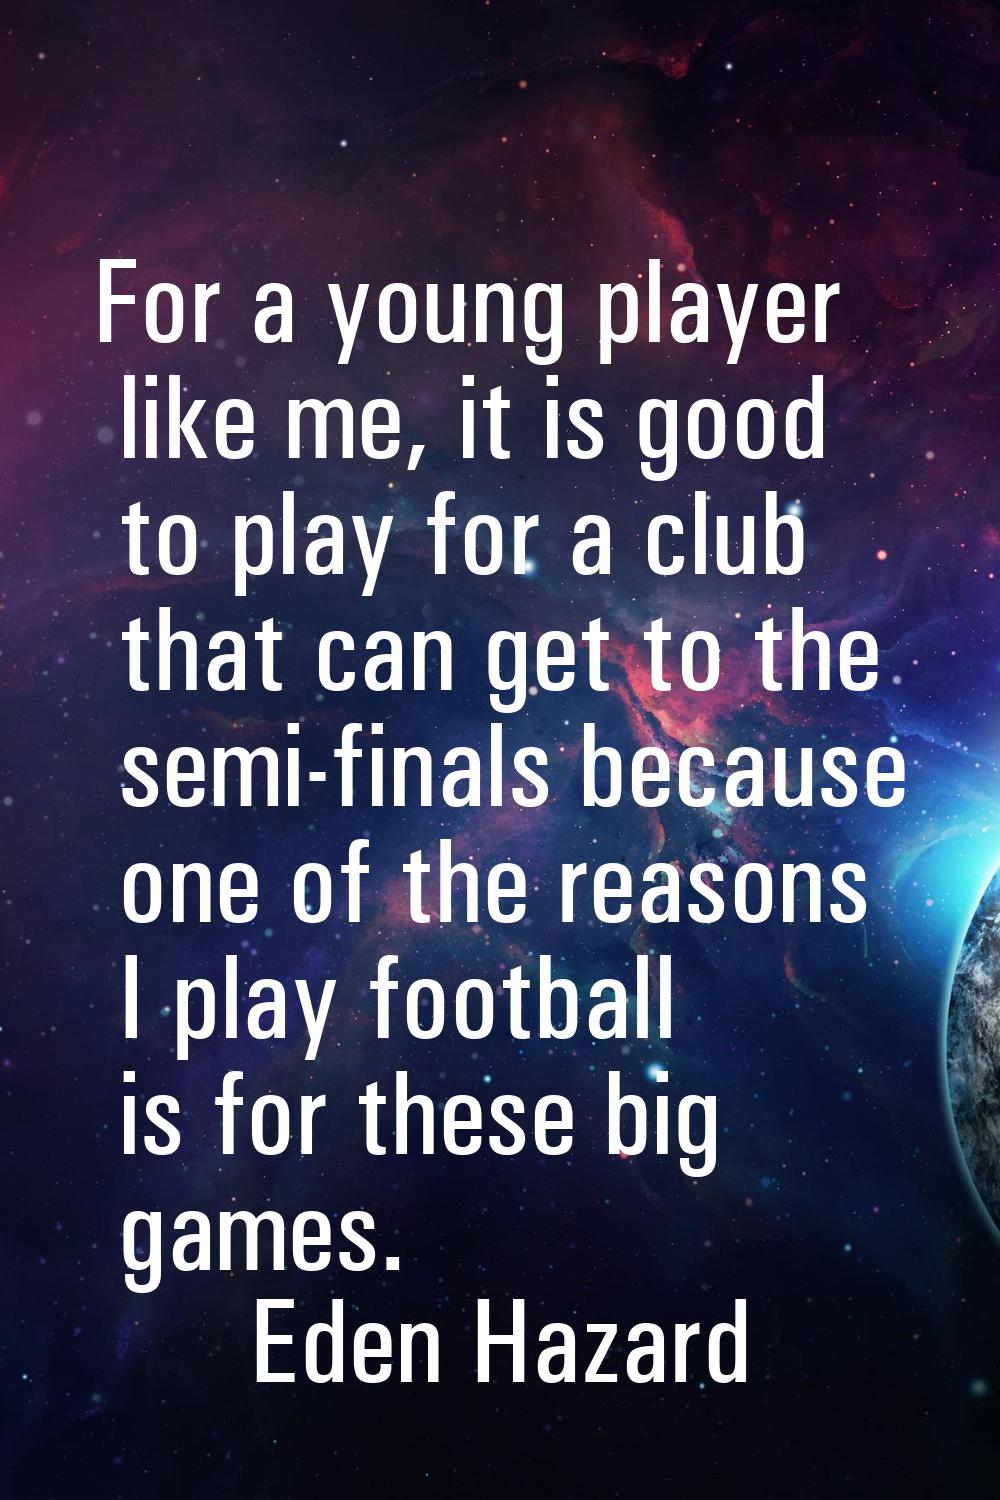 For a young player like me, it is good to play for a club that can get to the semi-finals because o